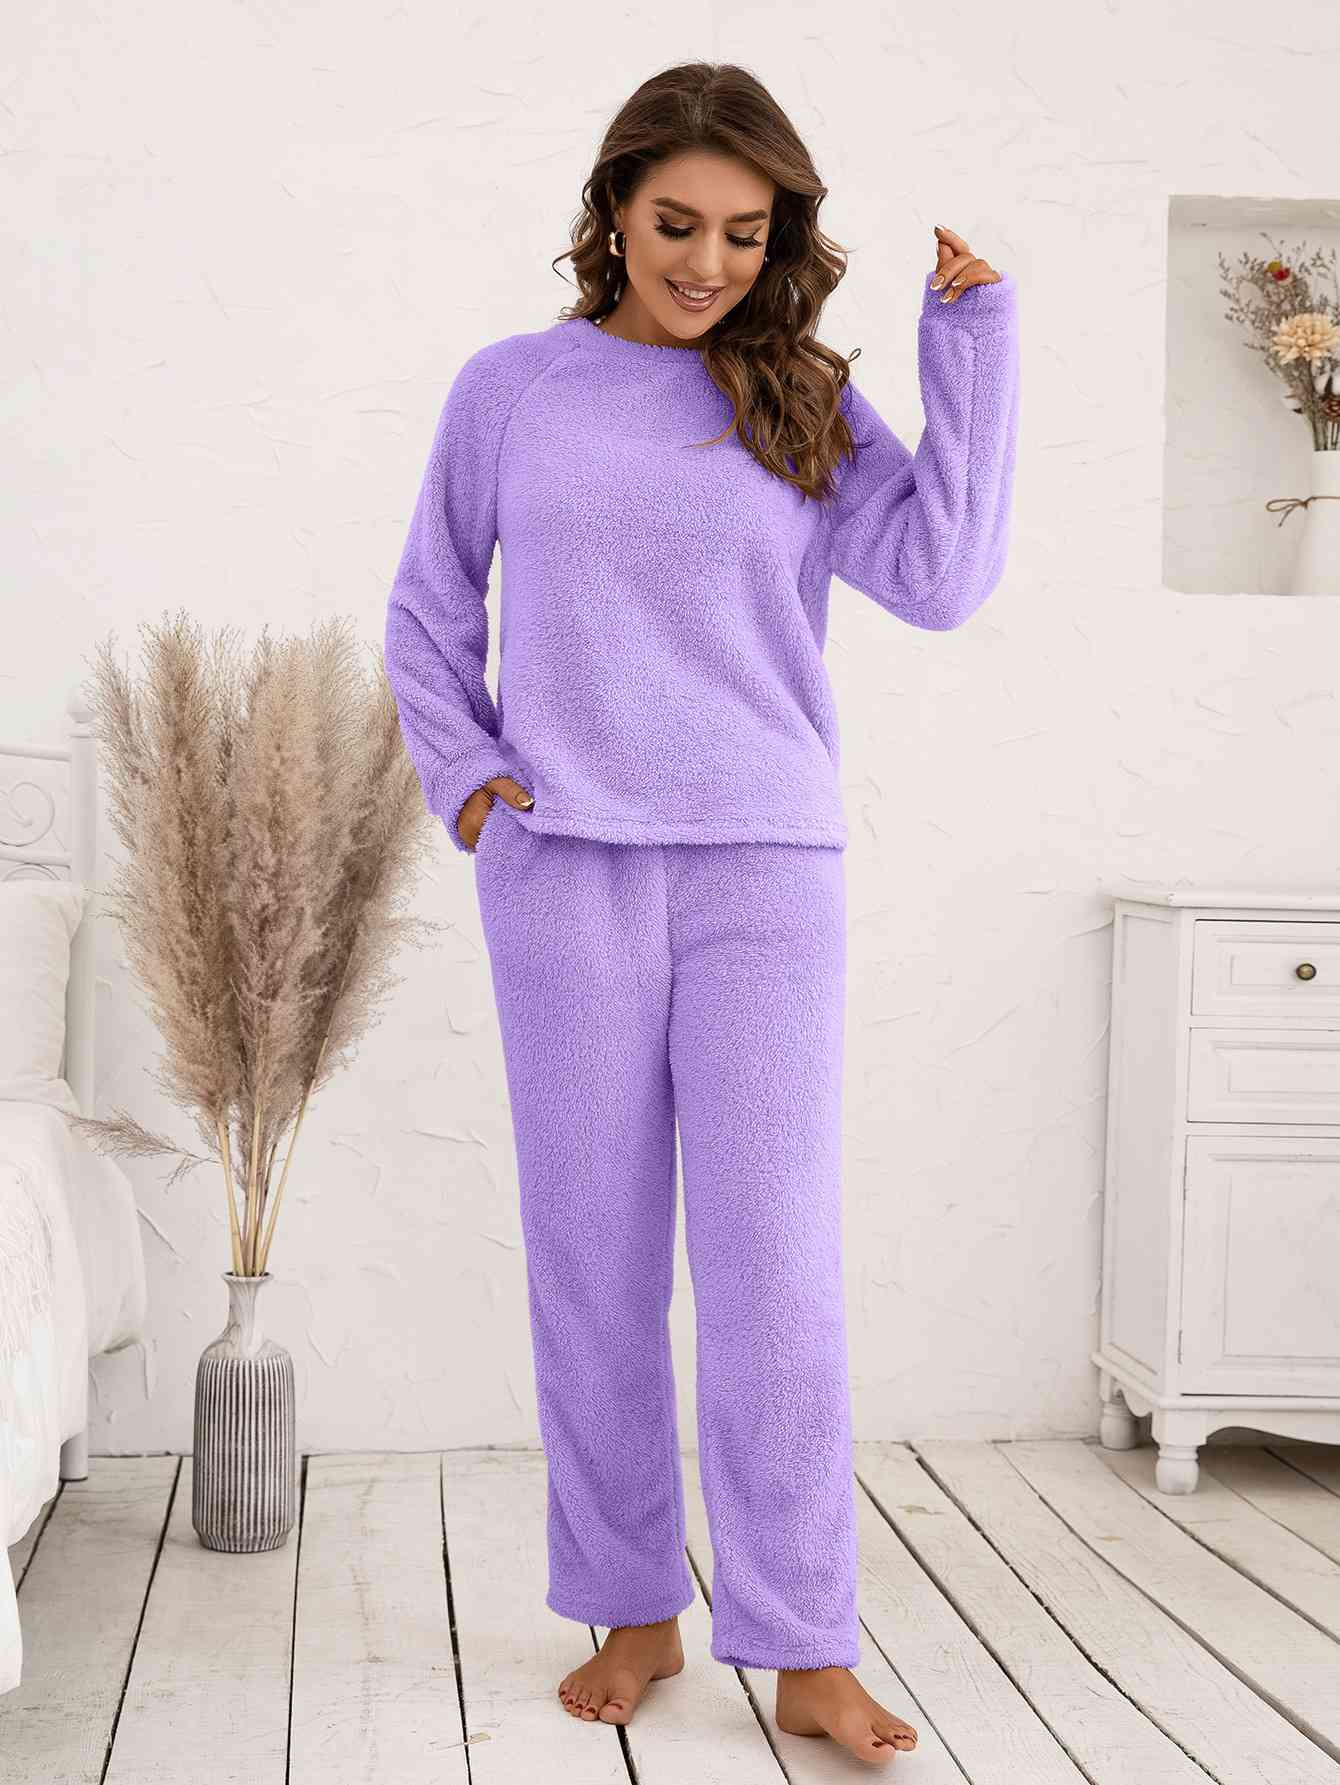 Teddy Long Sleeve Top and Pants Lounge Set (9 Colors) Loungewear Krazy Heart Designs Boutique Lavender S 